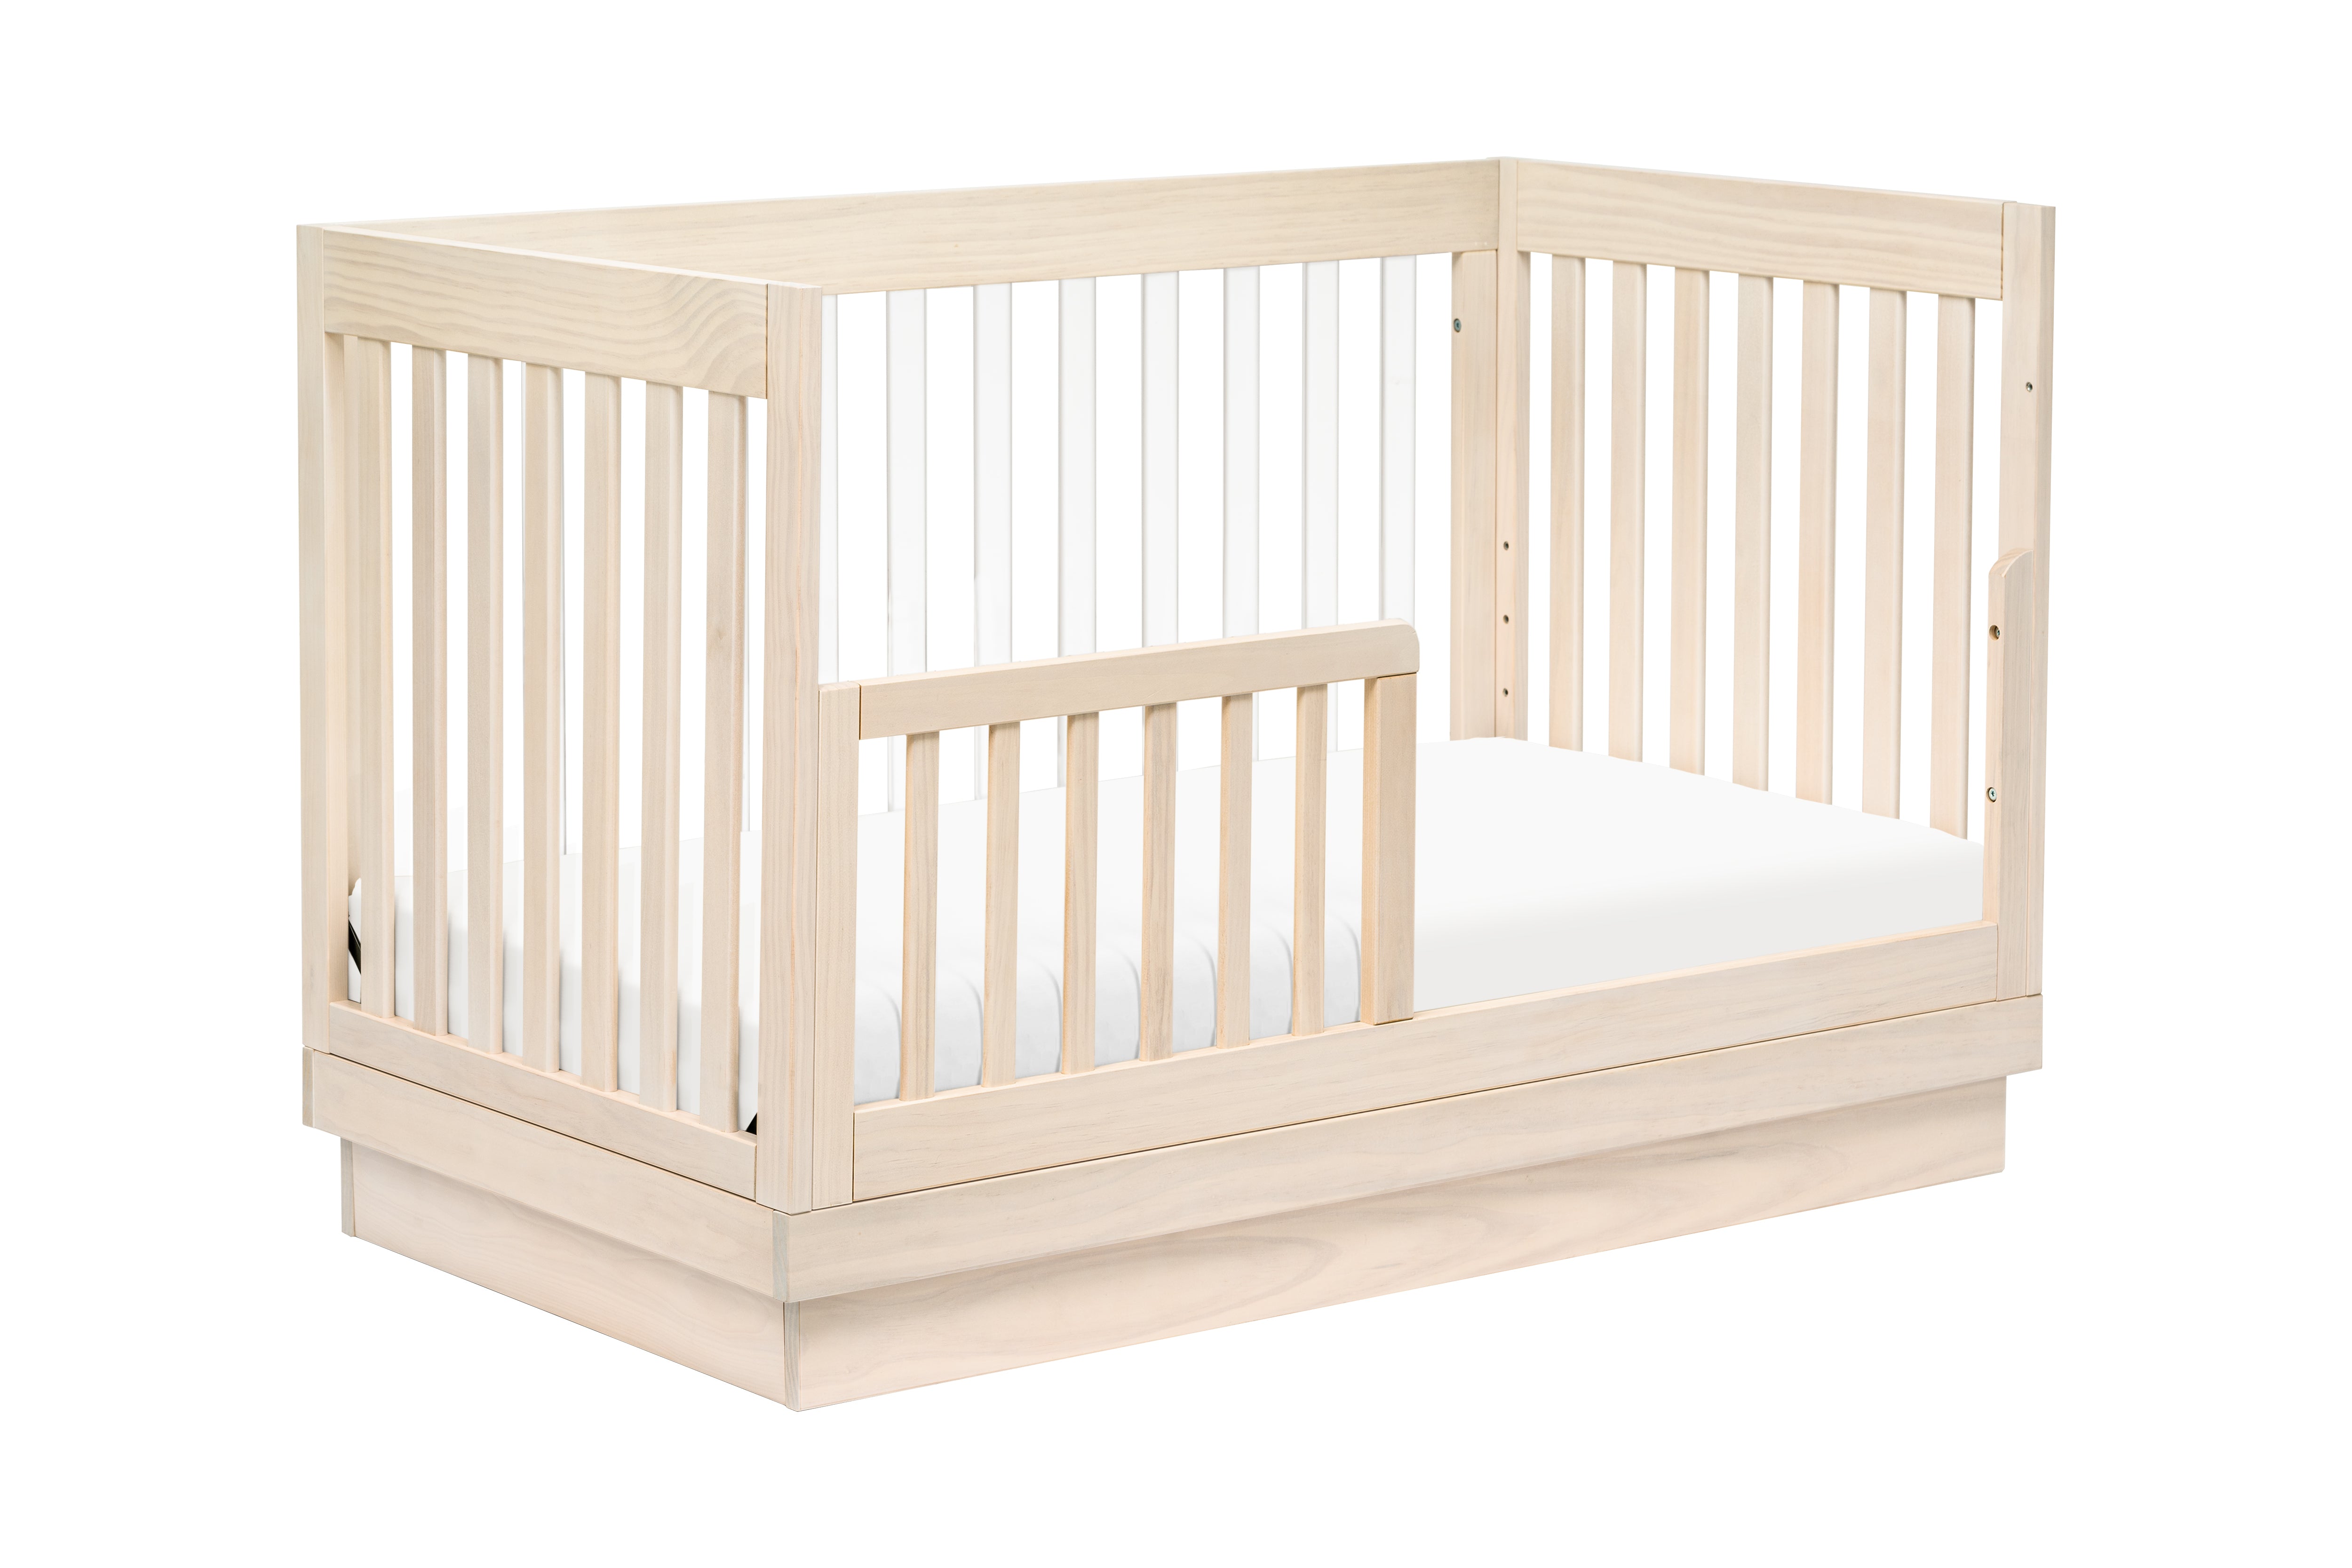 Harlow 3-in-1 Convertible Crib in Washed Natural - Twinkle Twinkle Little One